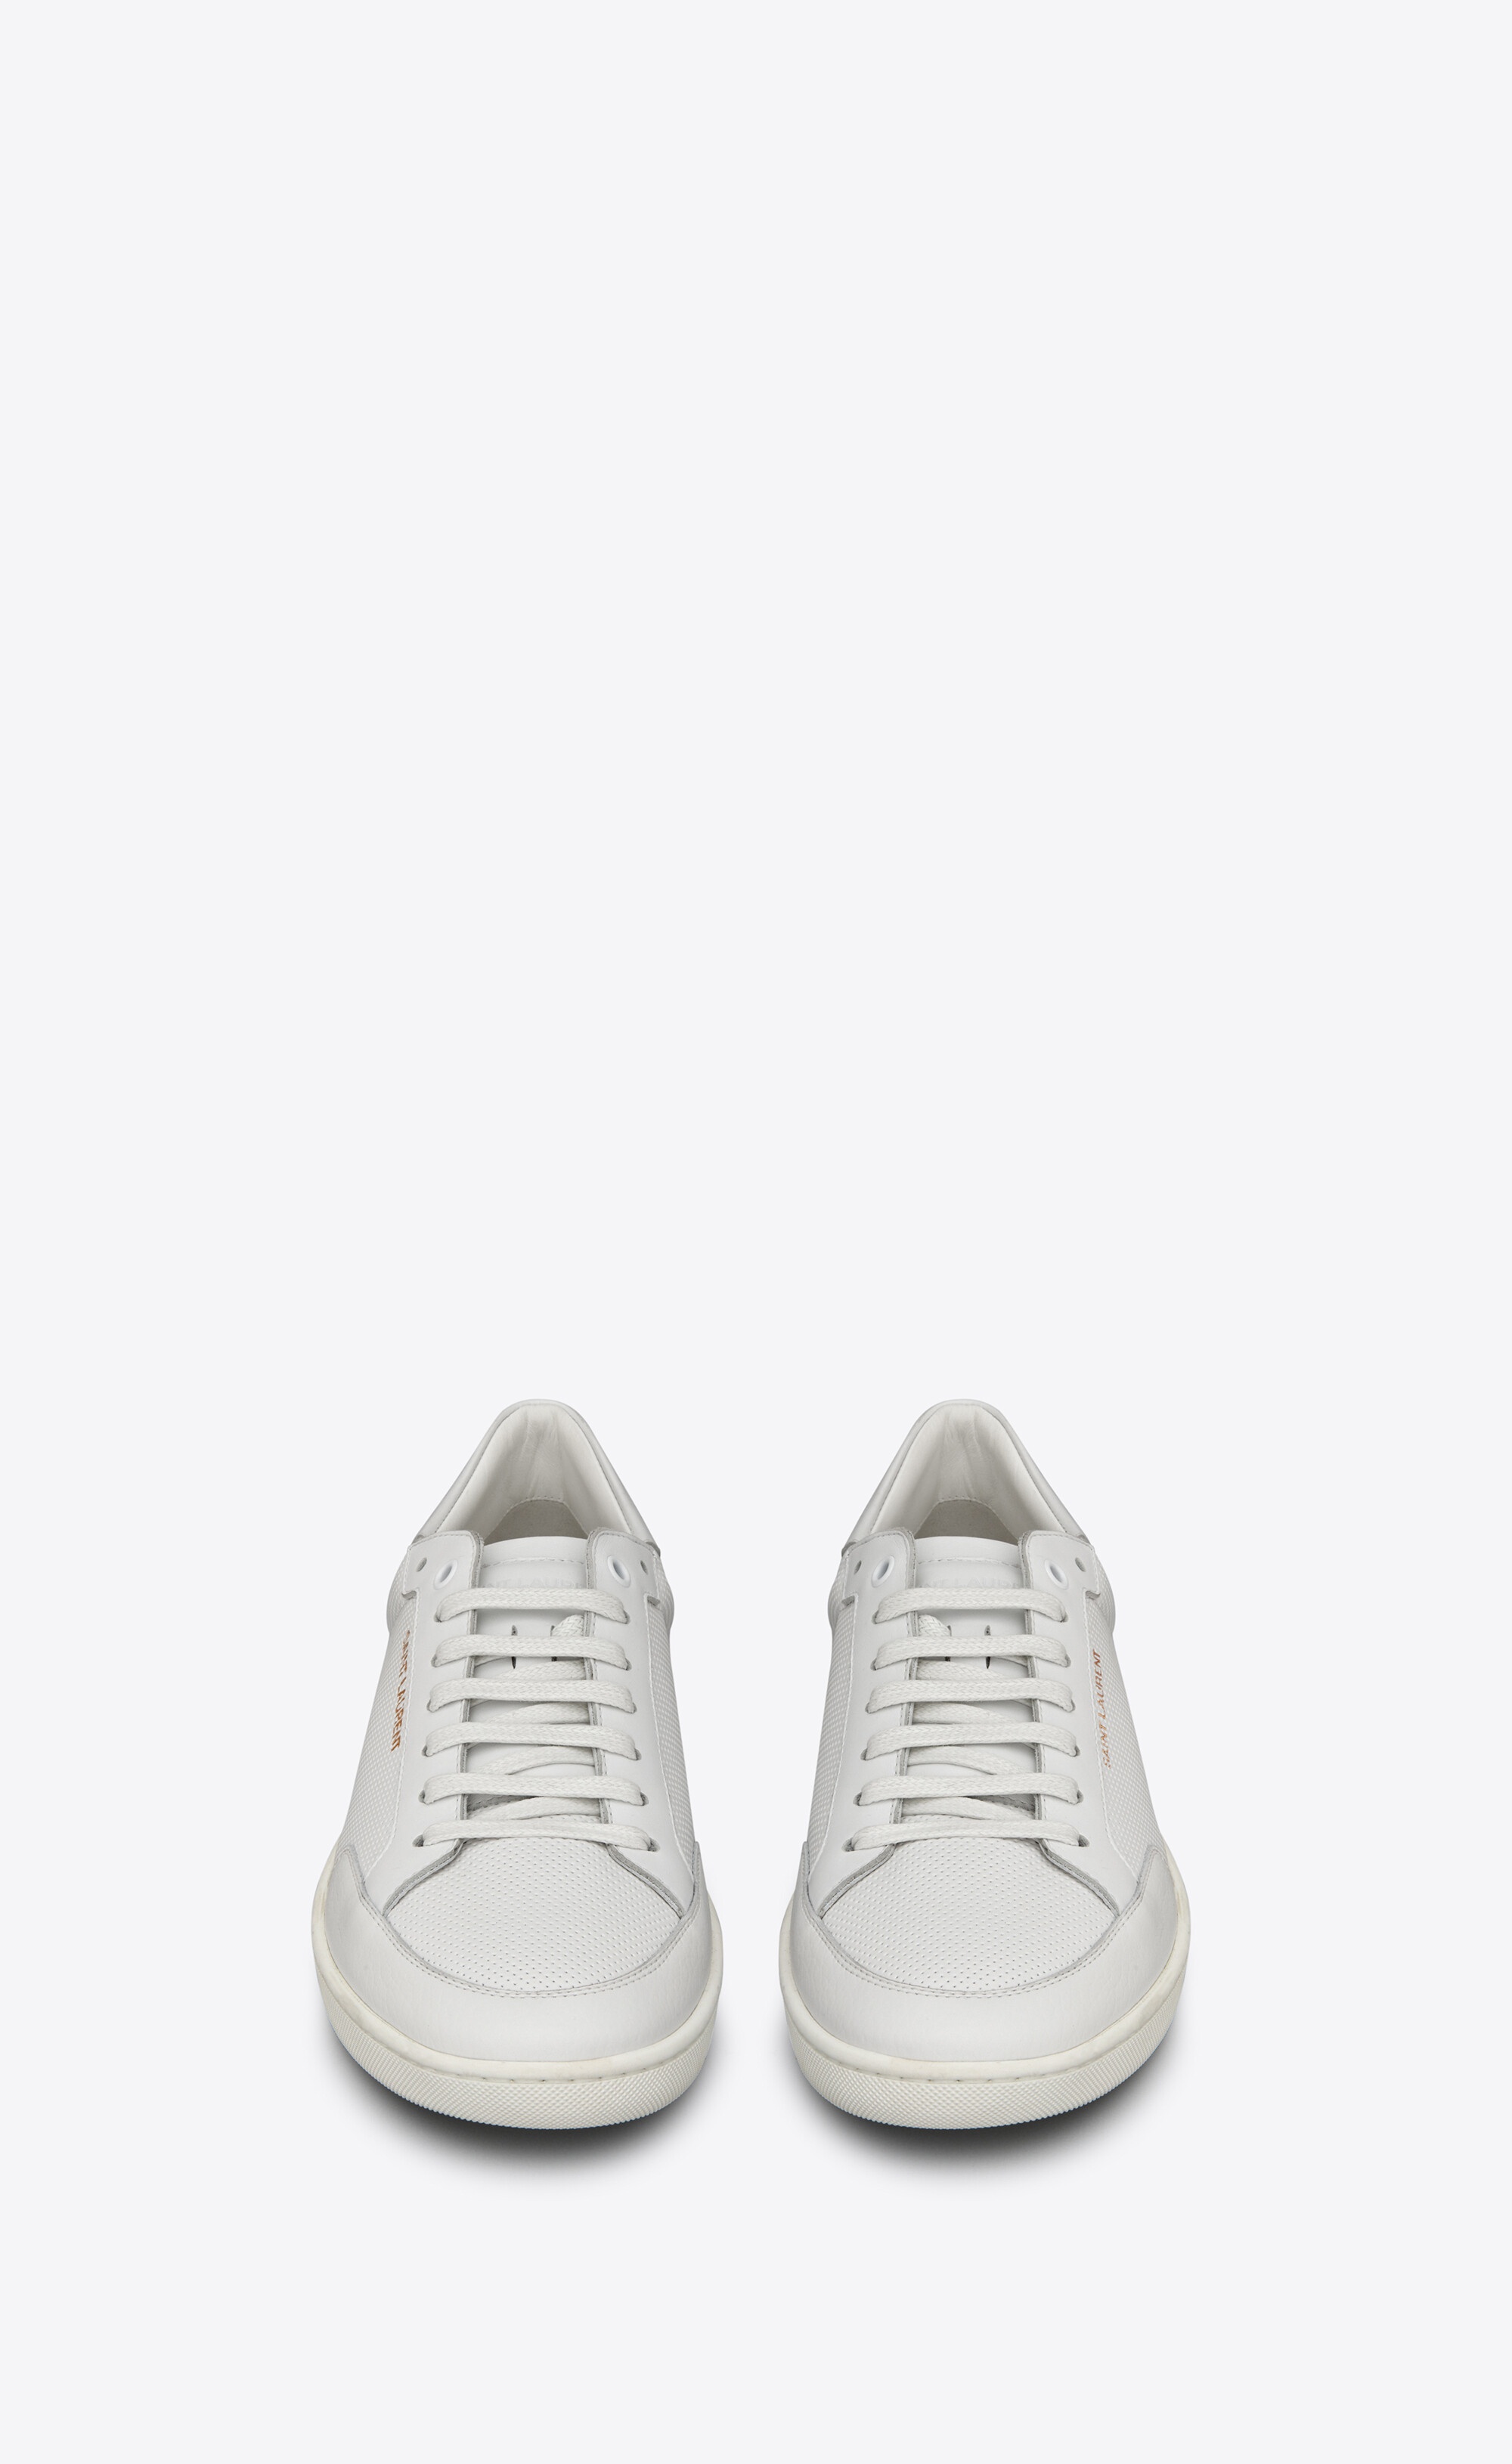 court classic sl/10 sneakers in perforated and smooth leather - 2